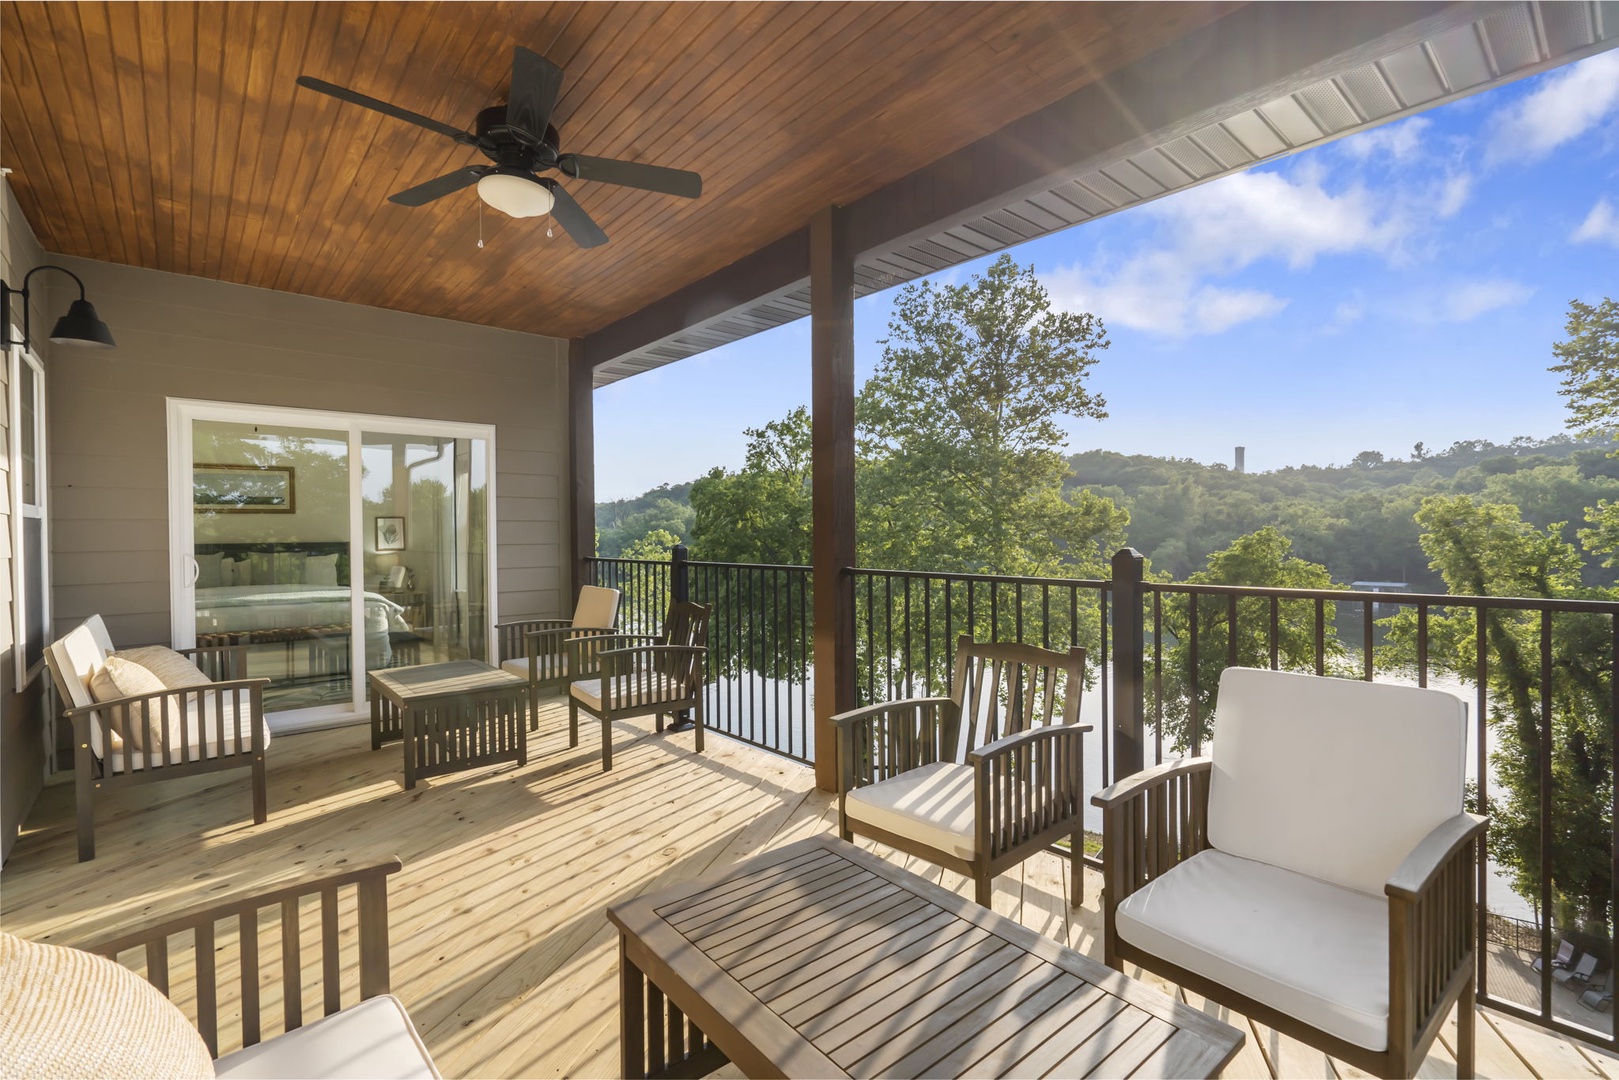 Take in the stunning views while lounging on the private back deck